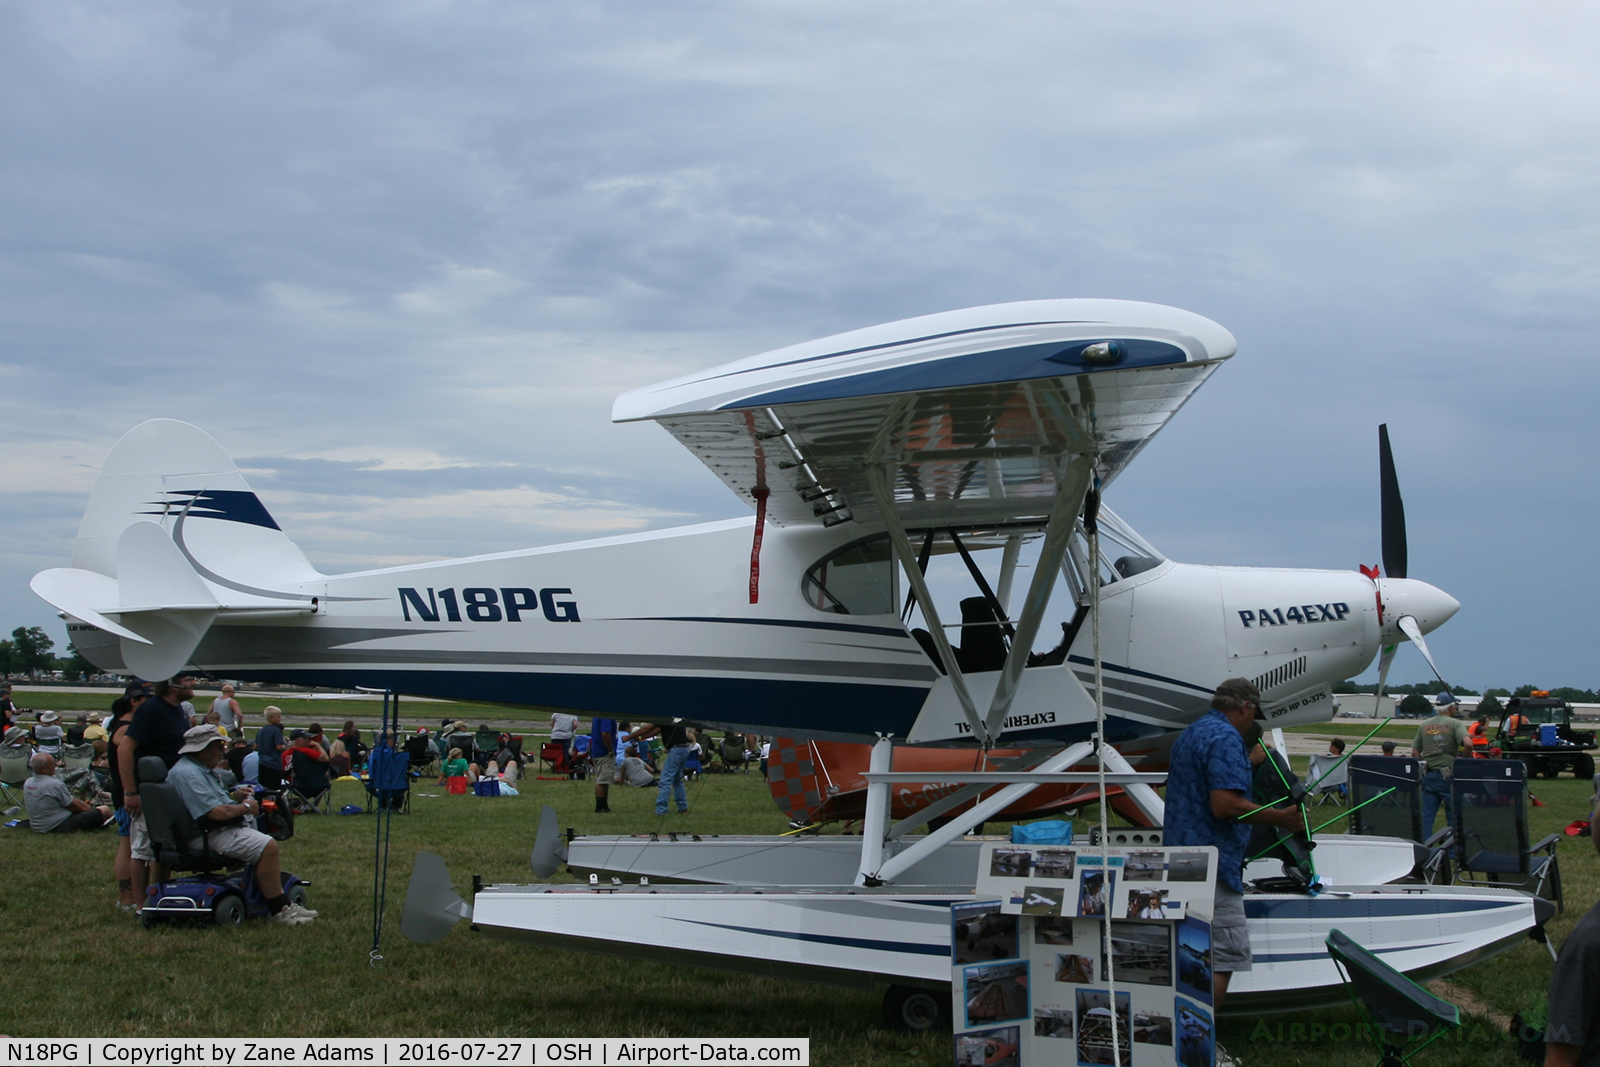 N18PG, 2016 GORDON GILCHRIST PA14 EXP C/N 2016-1, At the 2016 EAA AirVenture - Oshkosh, Wisconsin